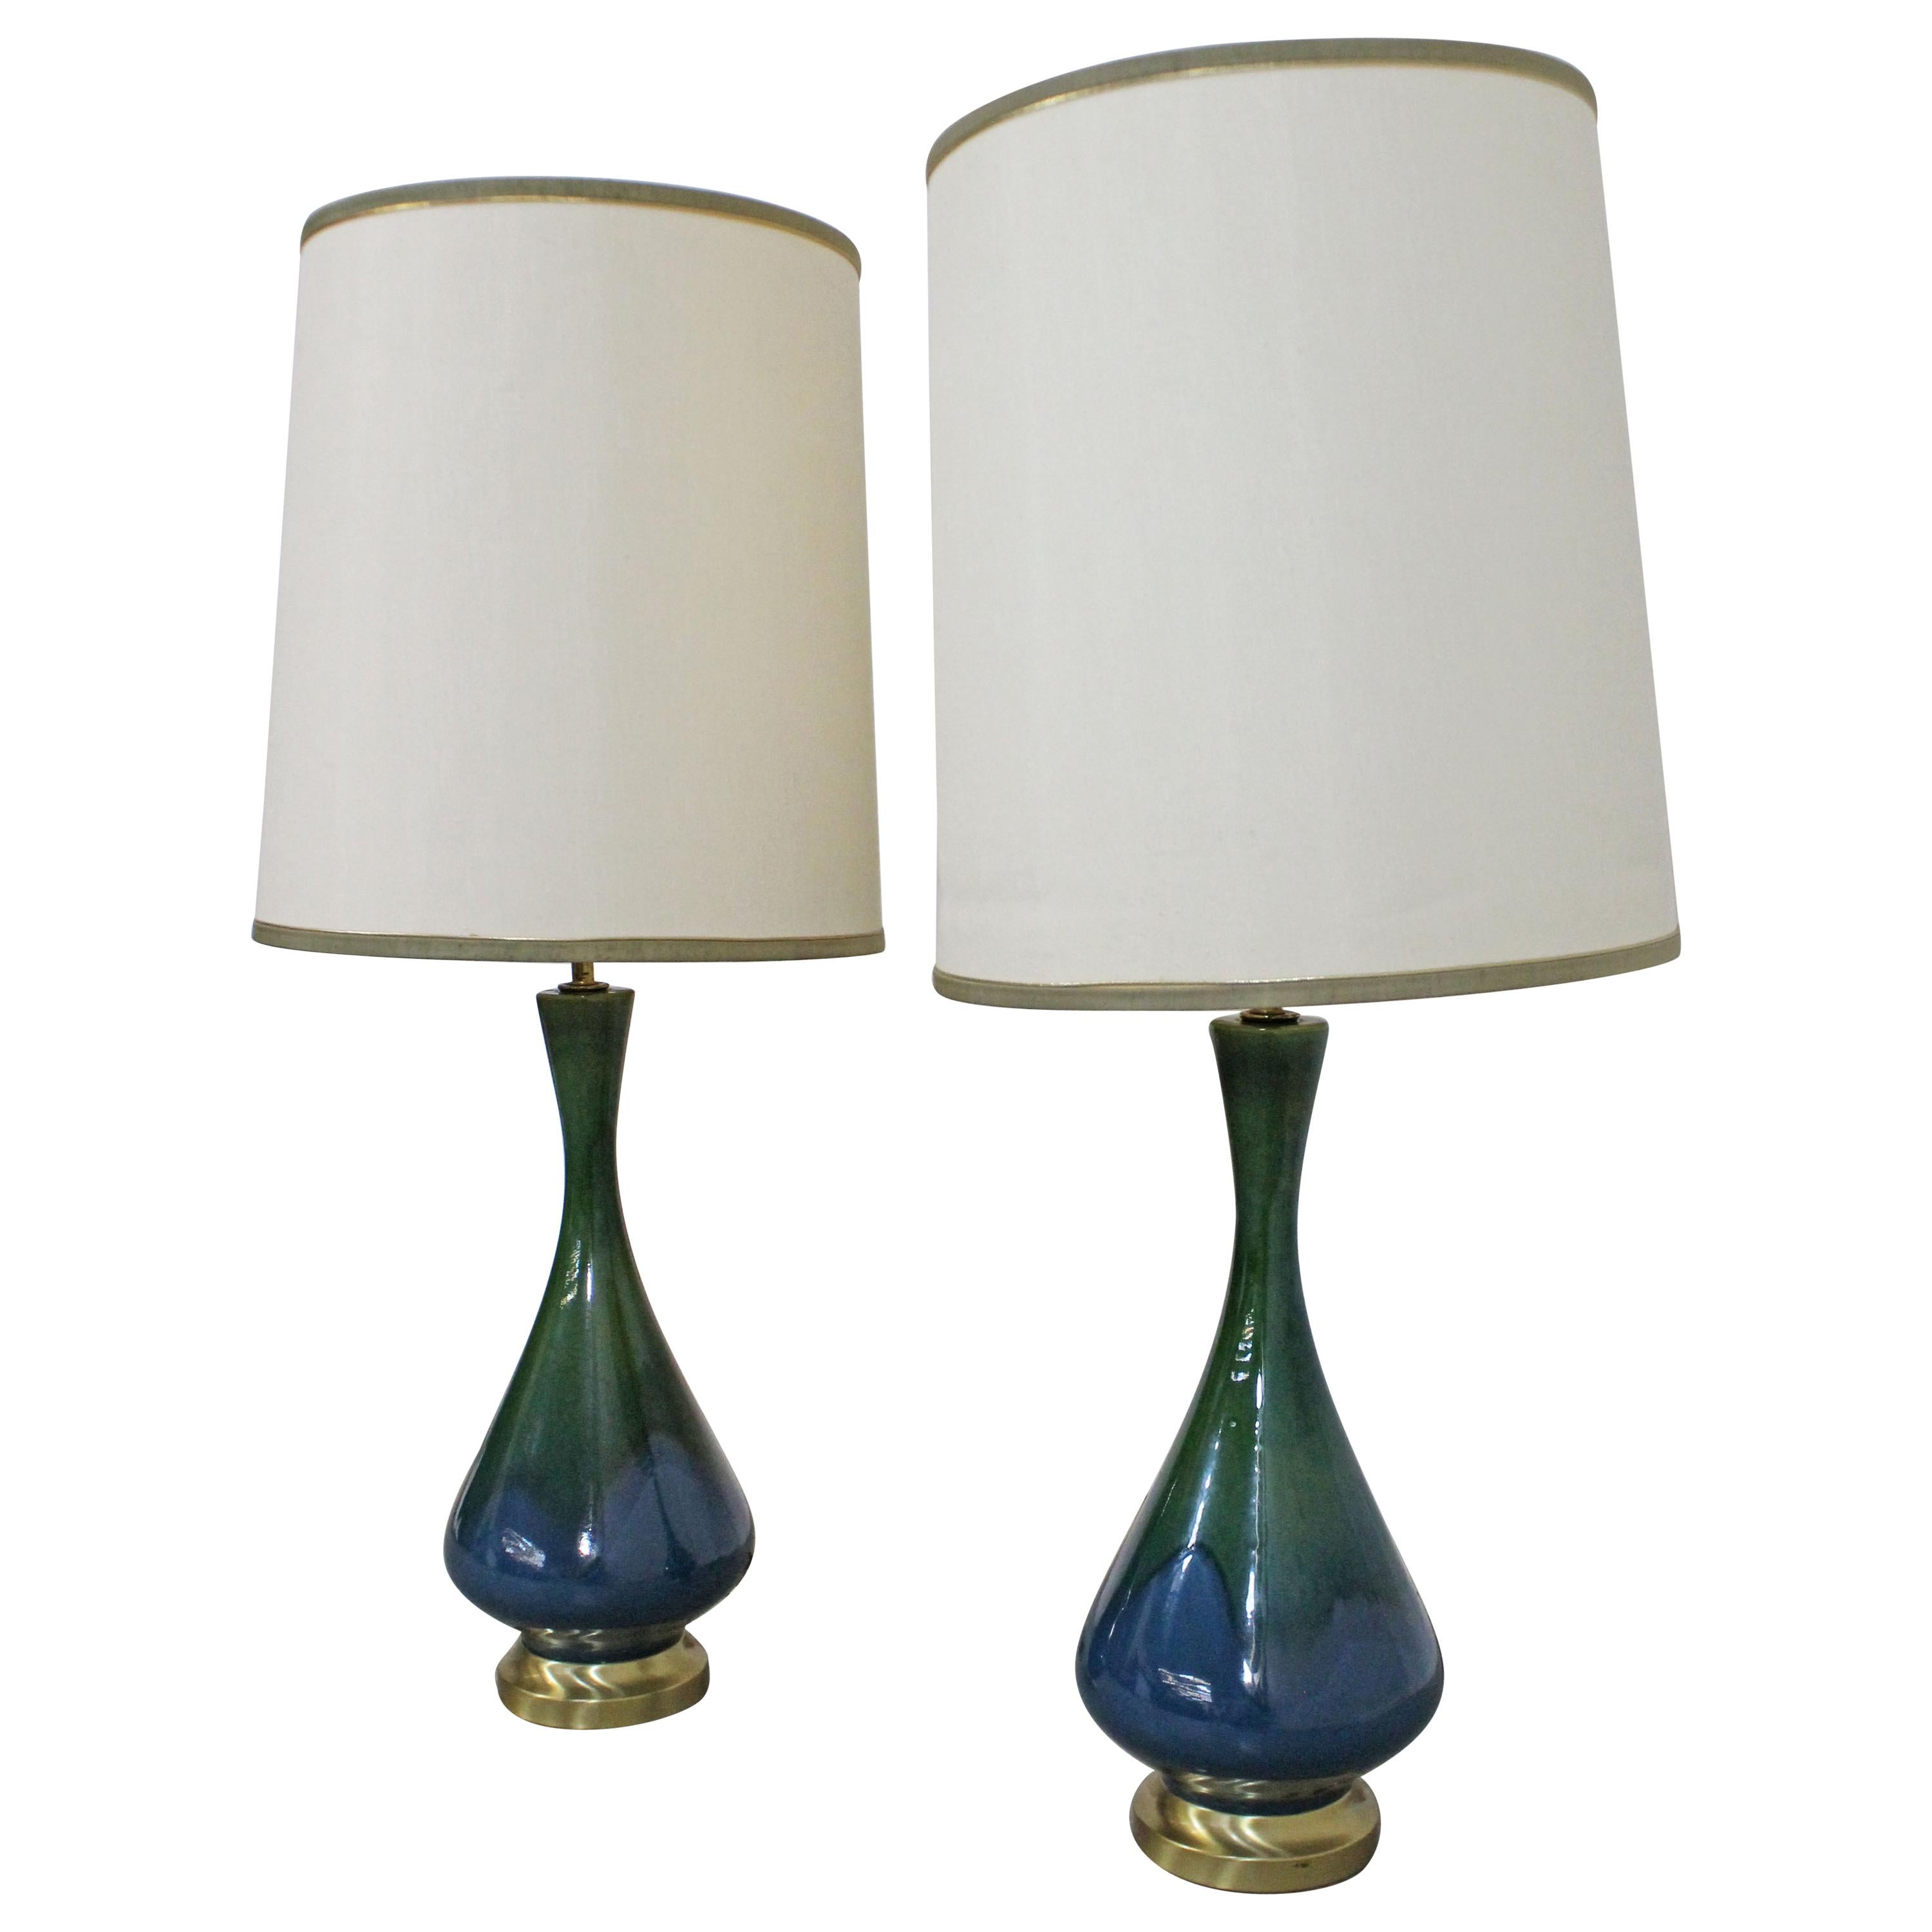 Pair of Mid-Century Modern Blue Green Drip Glaze Table Lamps